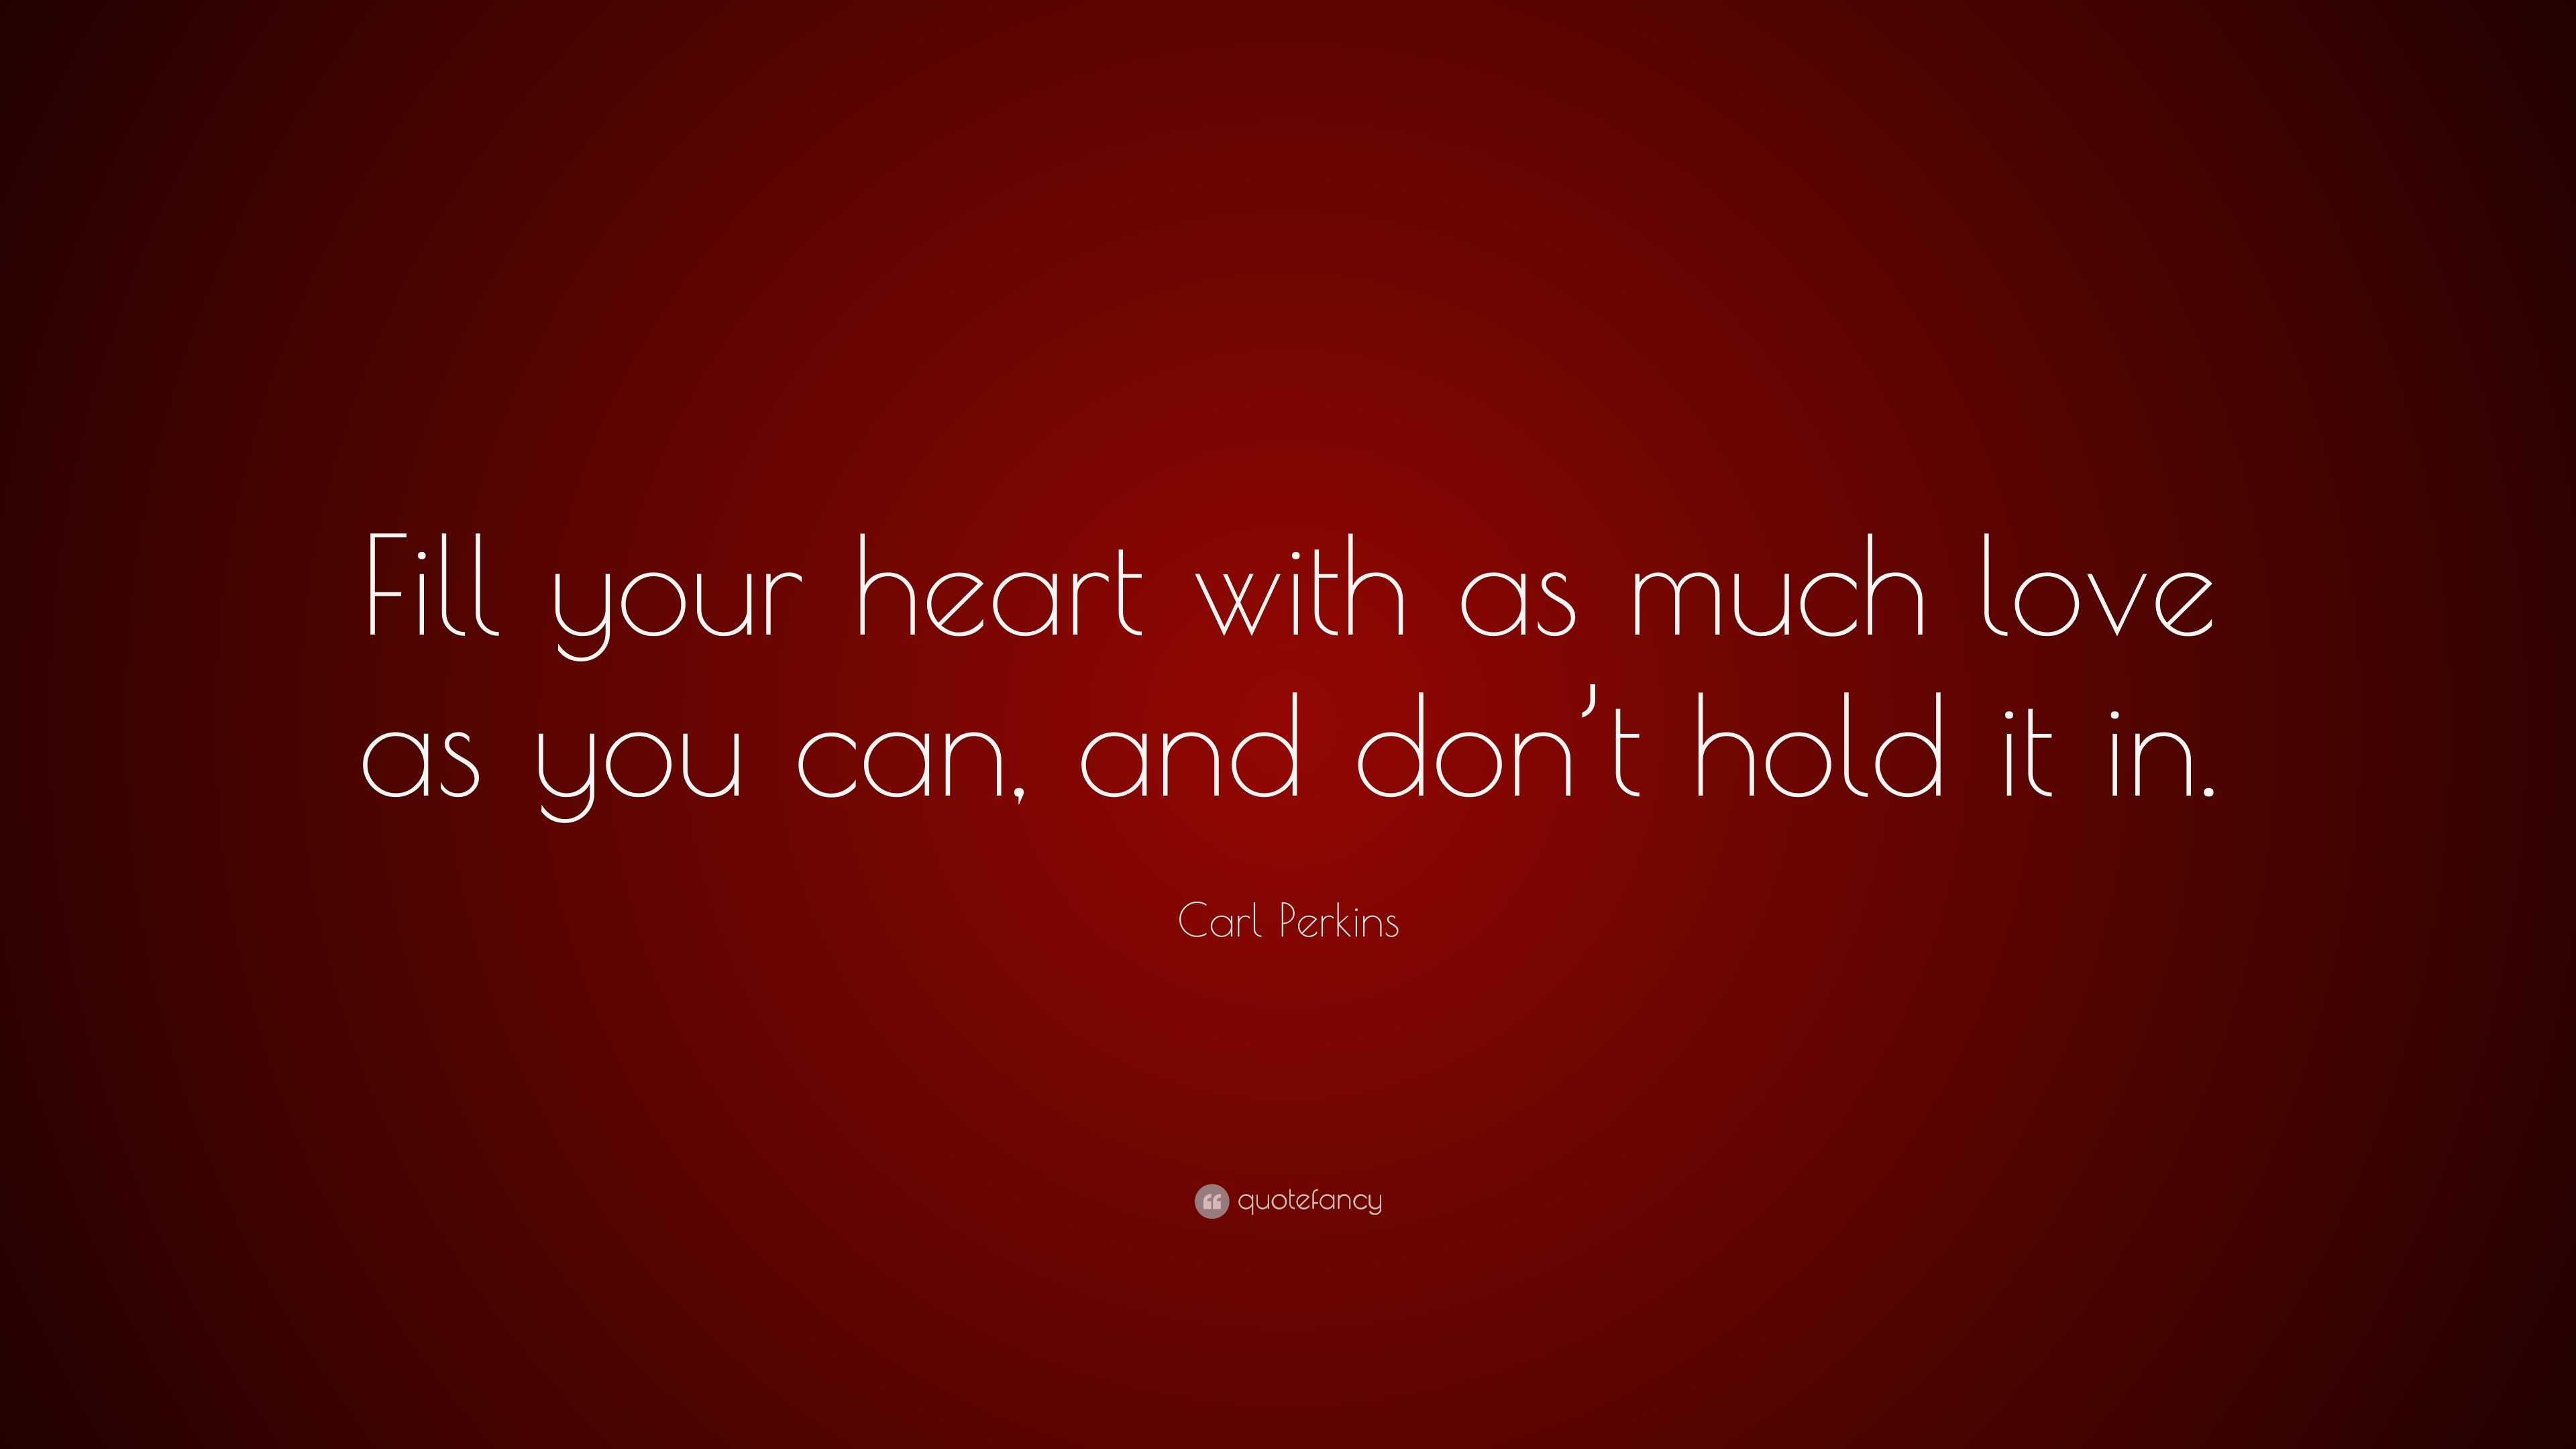 Carl Perkins Quote: “Fill your heart with as much love as you can, and ...